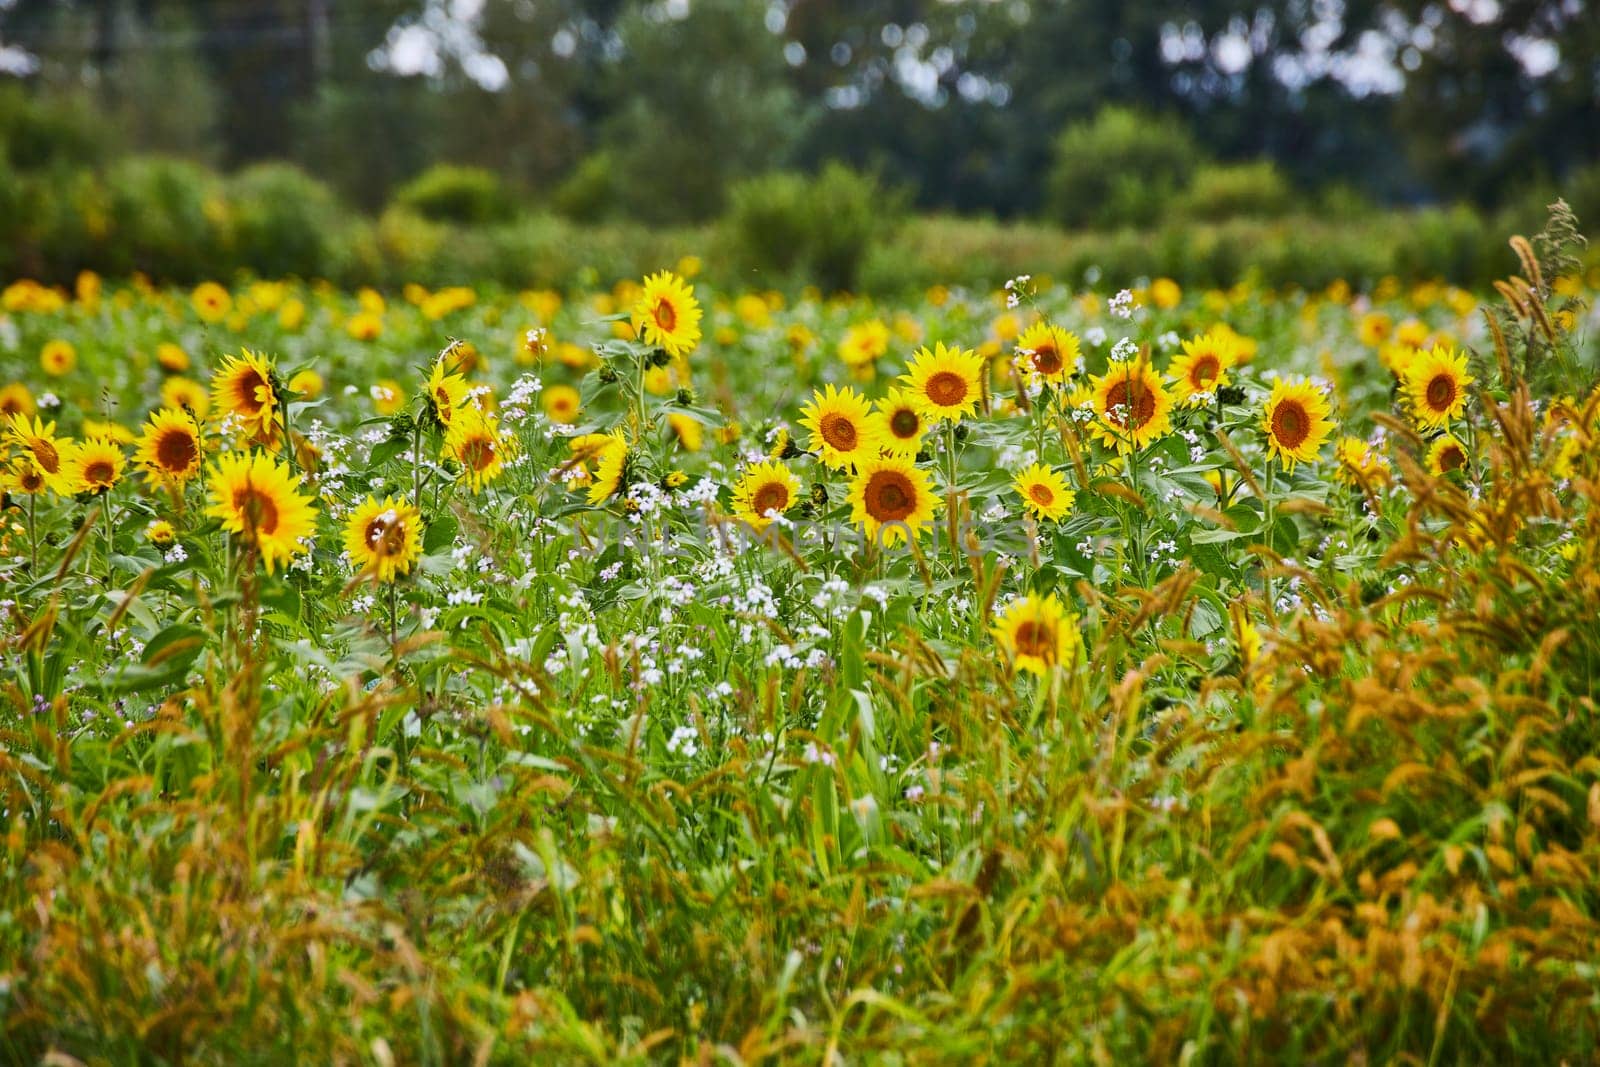 Lush Sunflower and Wildflower Field with Soft Lighting by njproductions